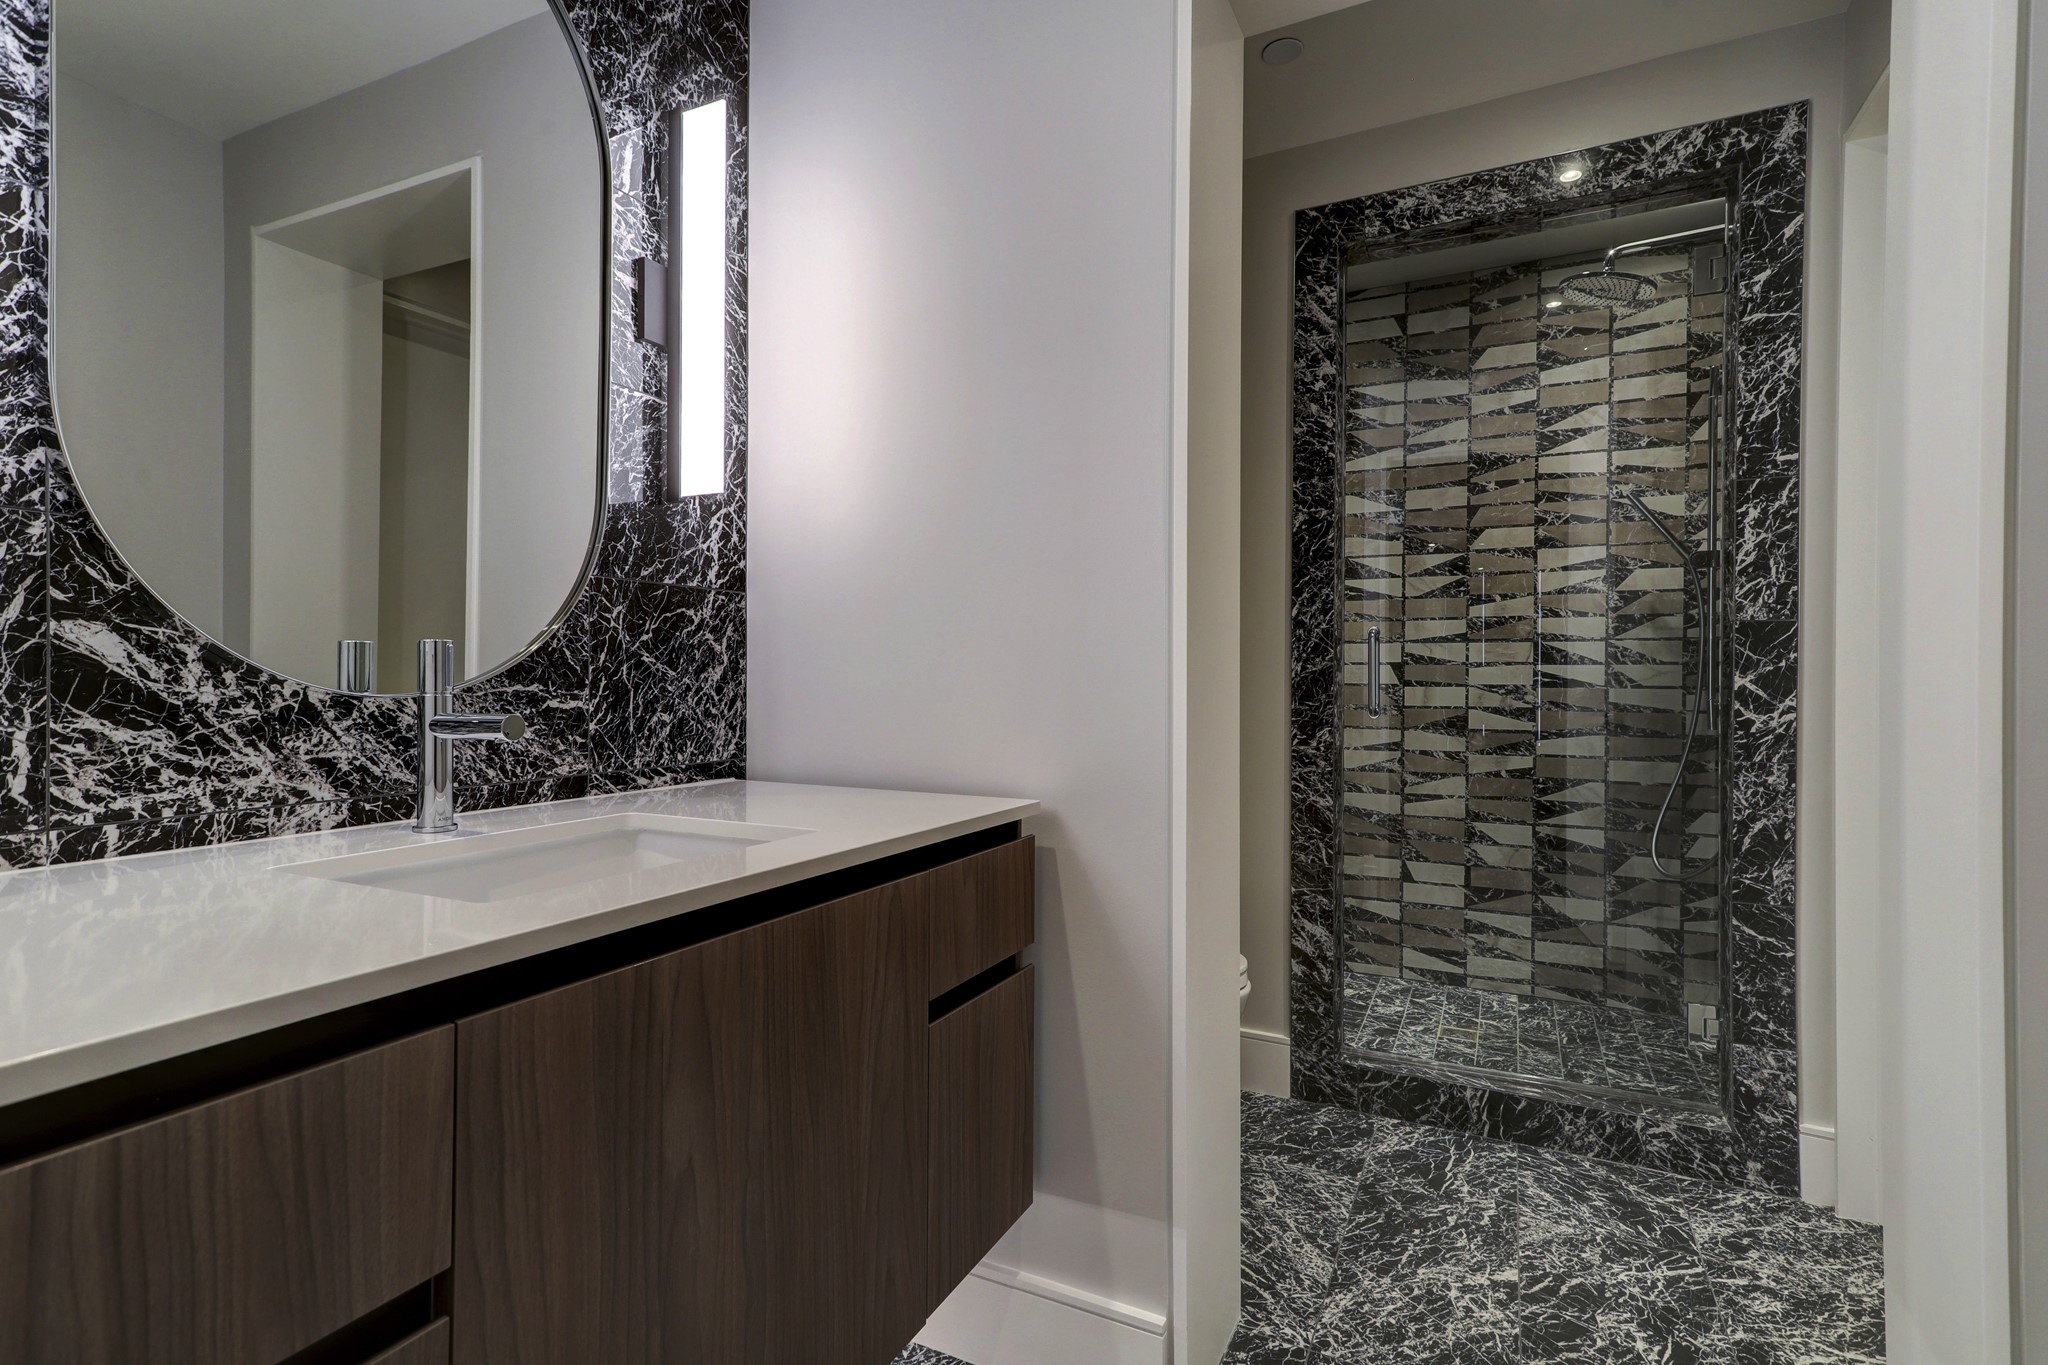 The media room's attached bath continues the lounge's moody theme with dark Piemme tile.